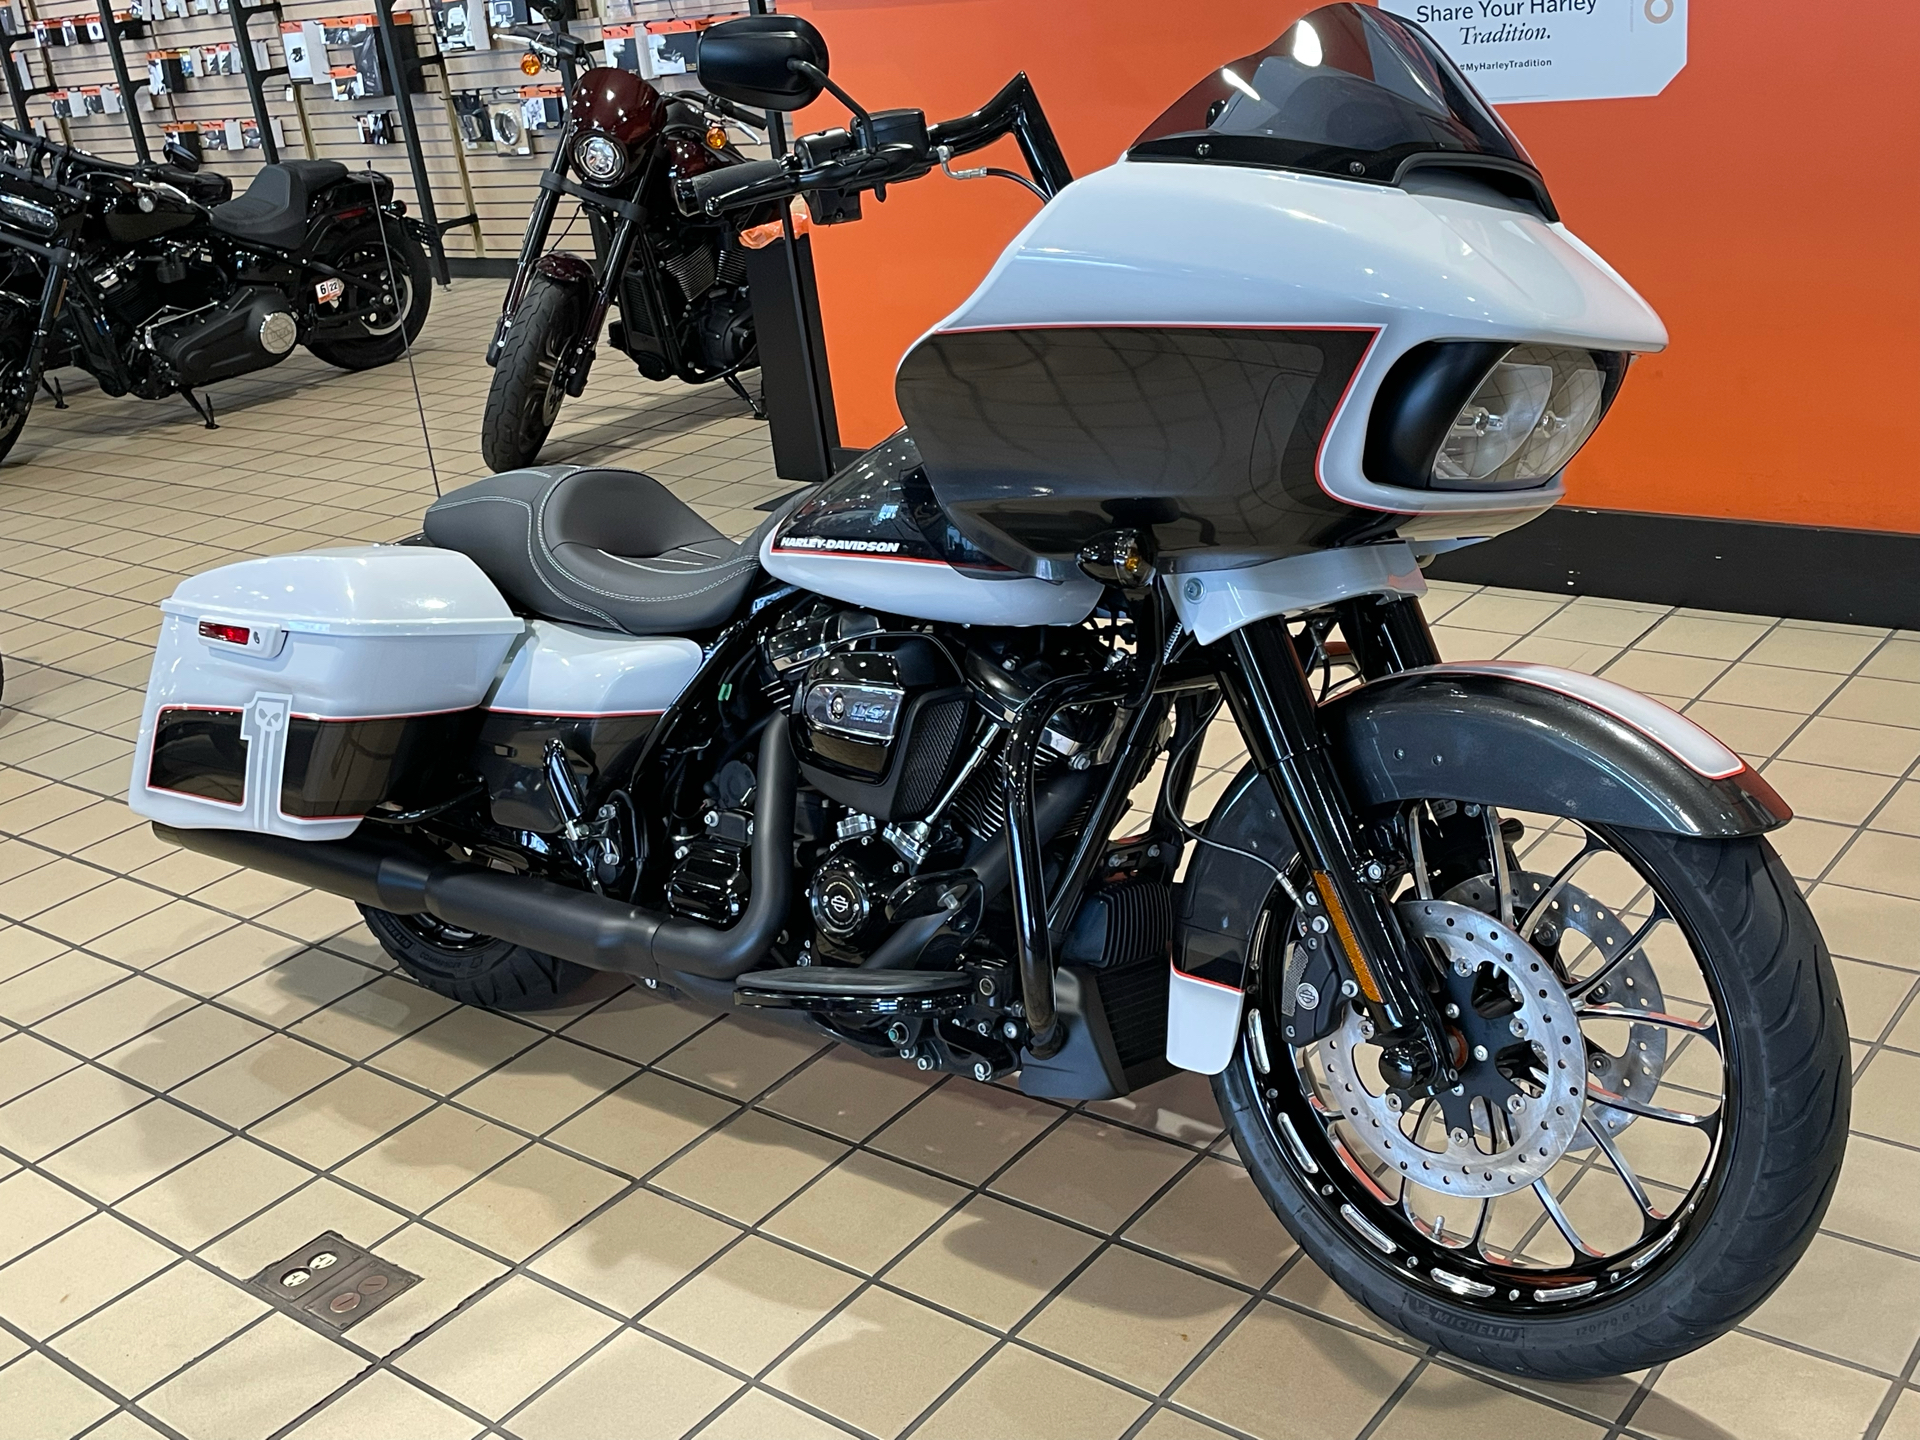 2020 Harley-Davidson Road Glide® Special in Dumfries, Virginia - Photo 4